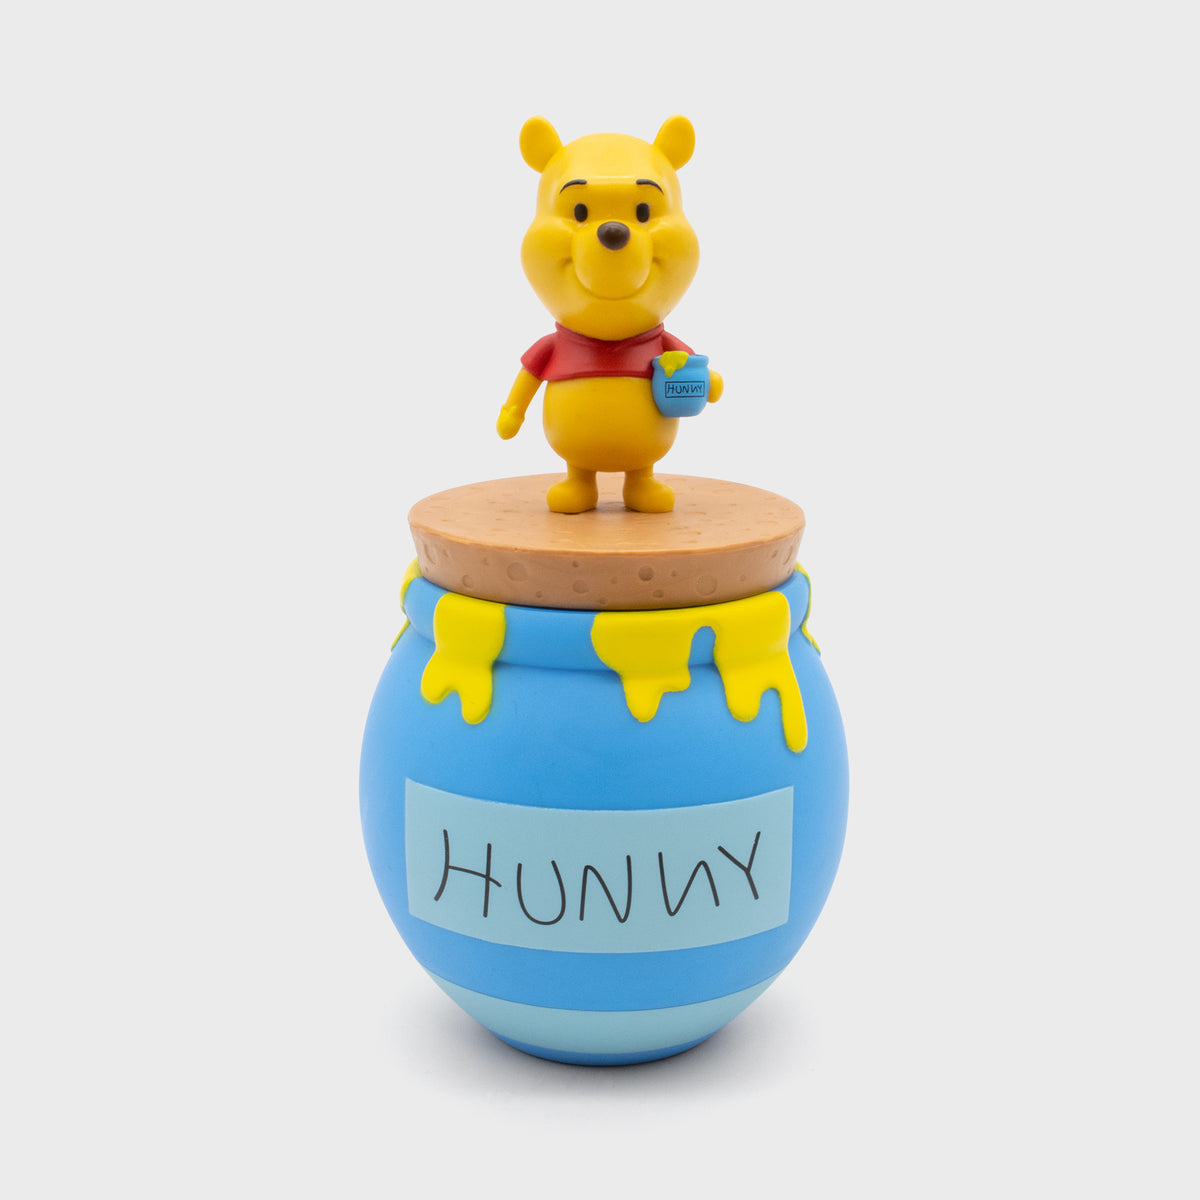 Disney's Winnie-the-Pooh - Smols Blind Box Collectible Figures - Serie